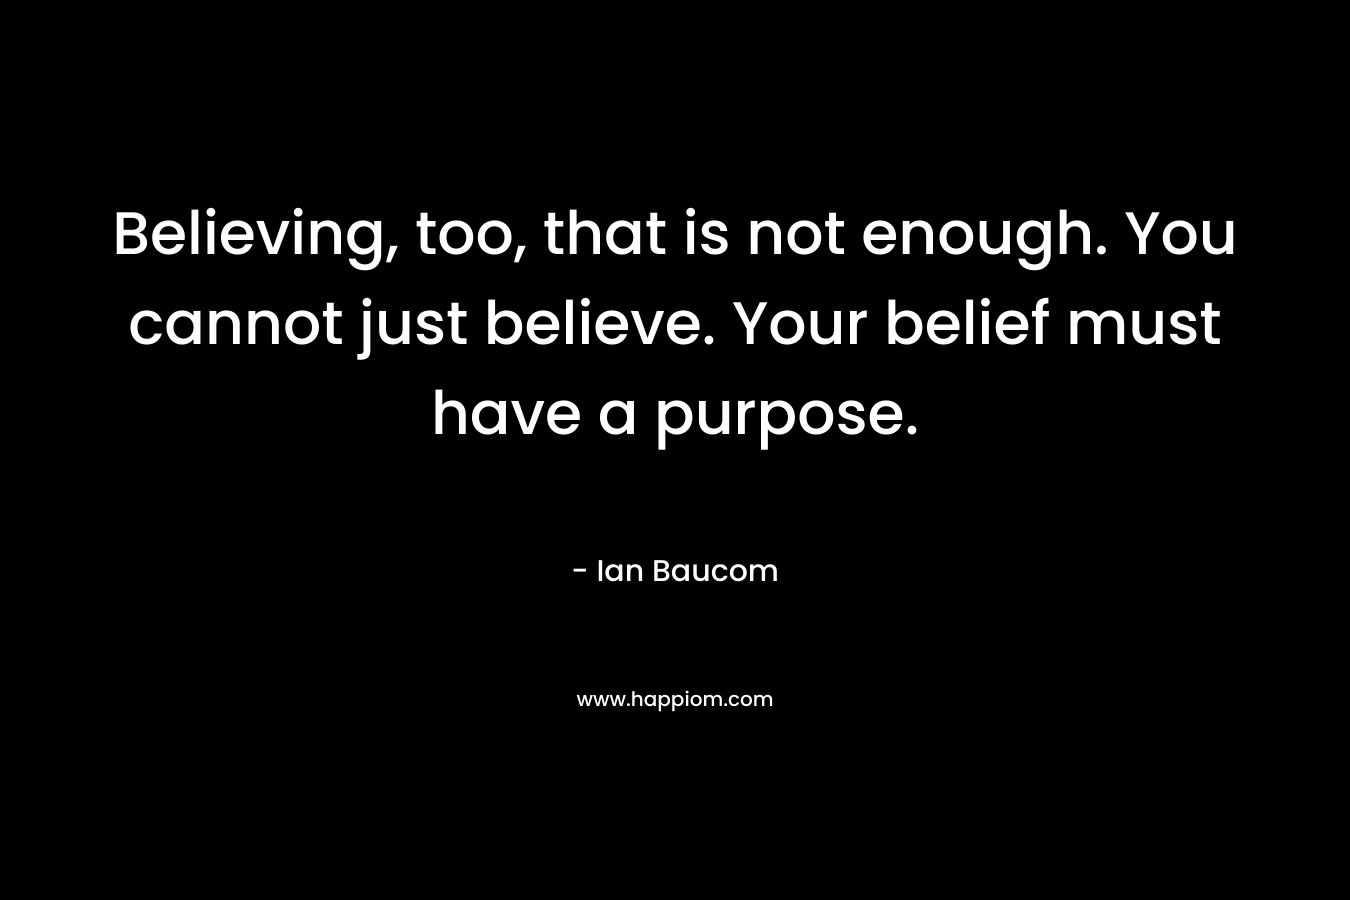 Believing, too, that is not enough. You cannot just believe. Your belief must have a purpose.